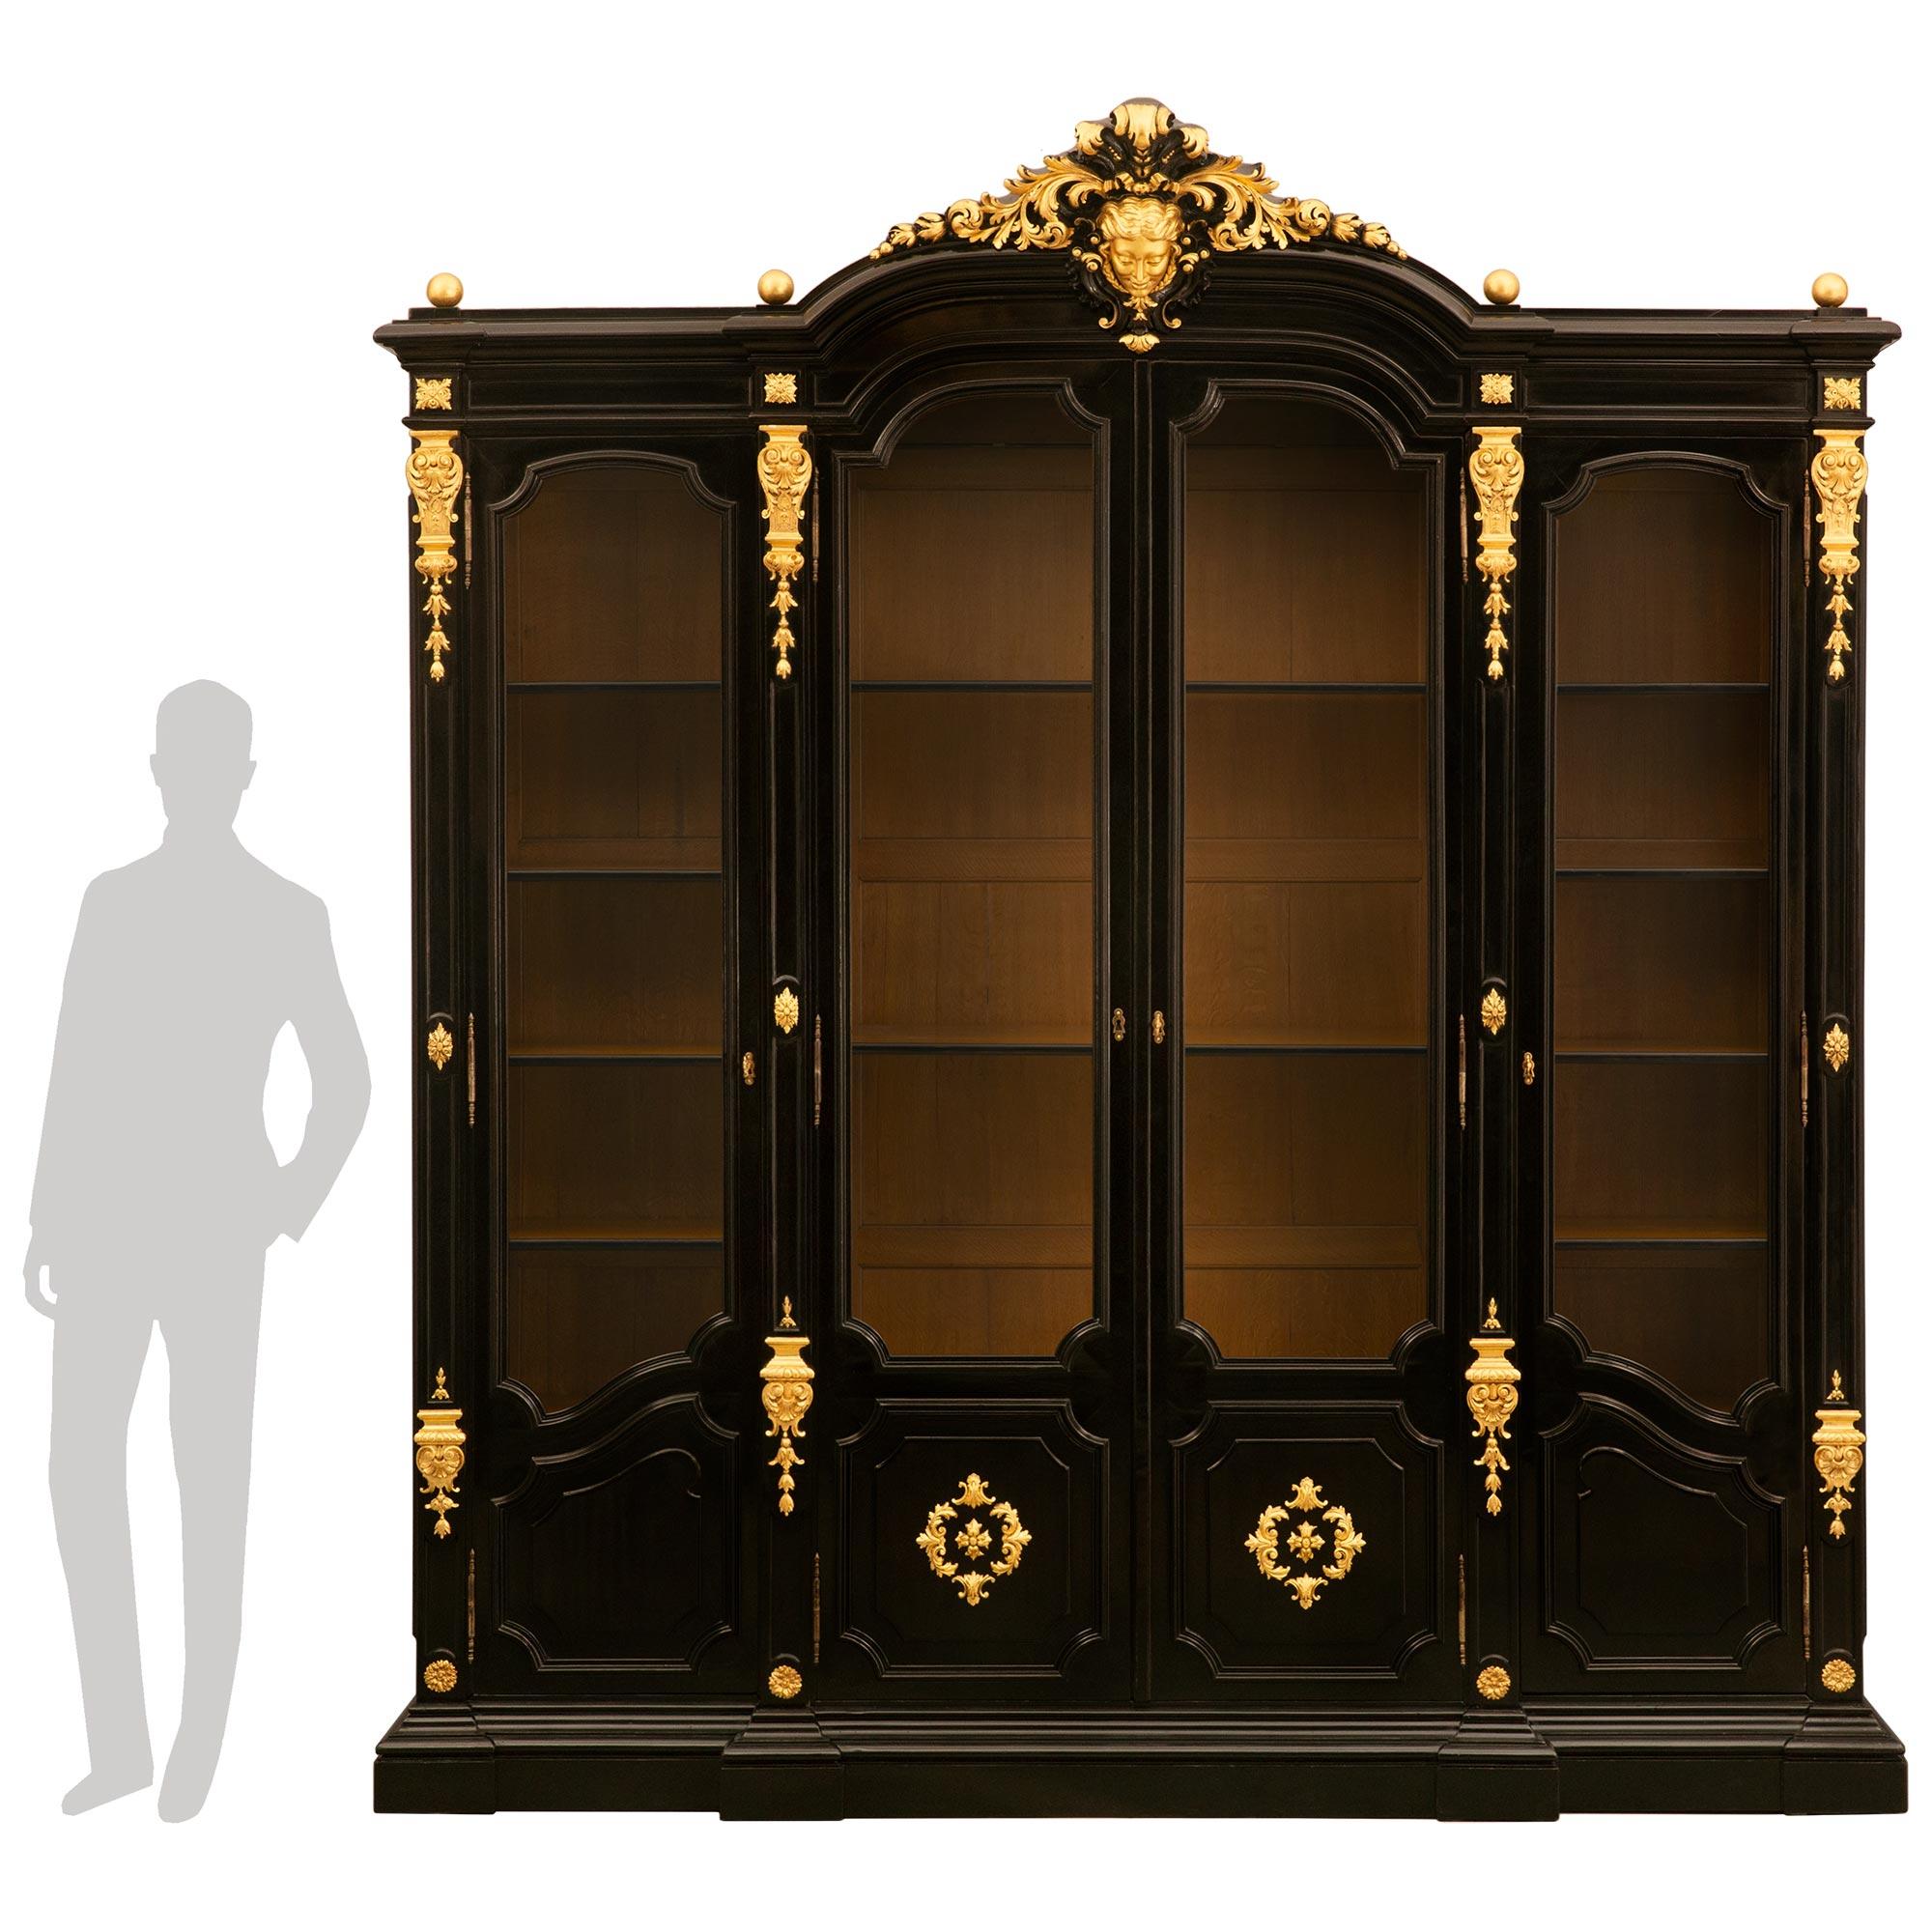 A most impressive and large scaled Italian 19th century Rococo Revival st. Ebonized Fruitwood and giltwood cabinet/vitrine. The four door cabinet is raised by a mottled plinth below the two central doors showcasing mottled square panels with concave